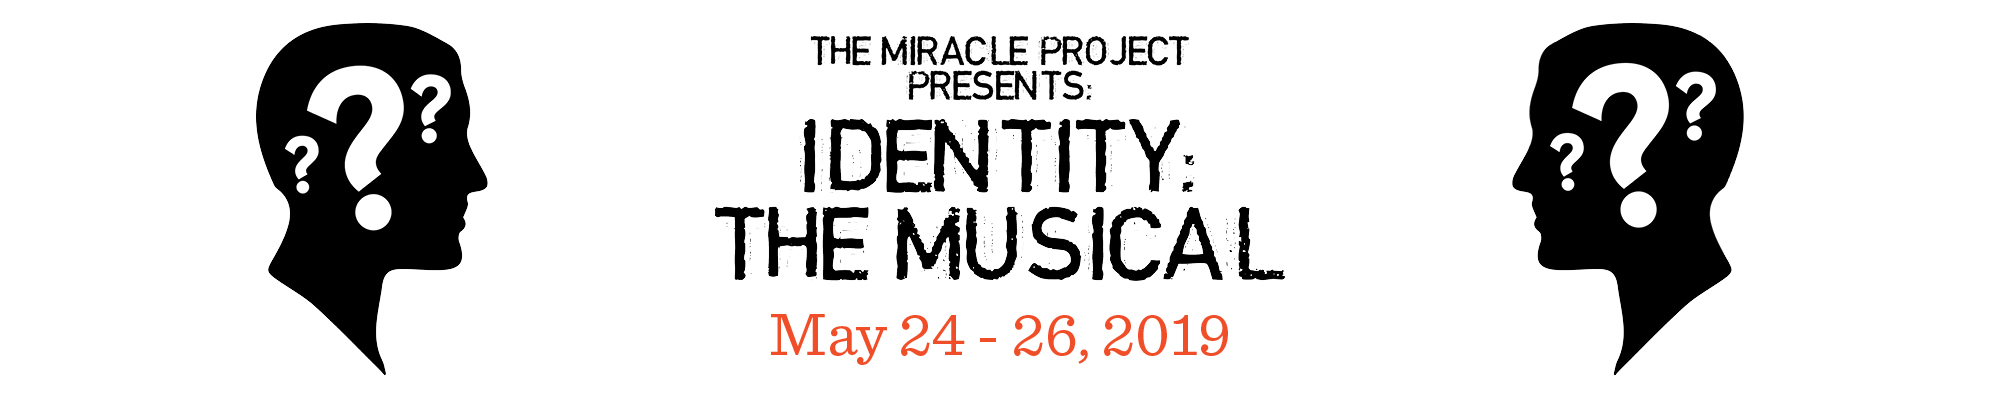 Identity: The Musical